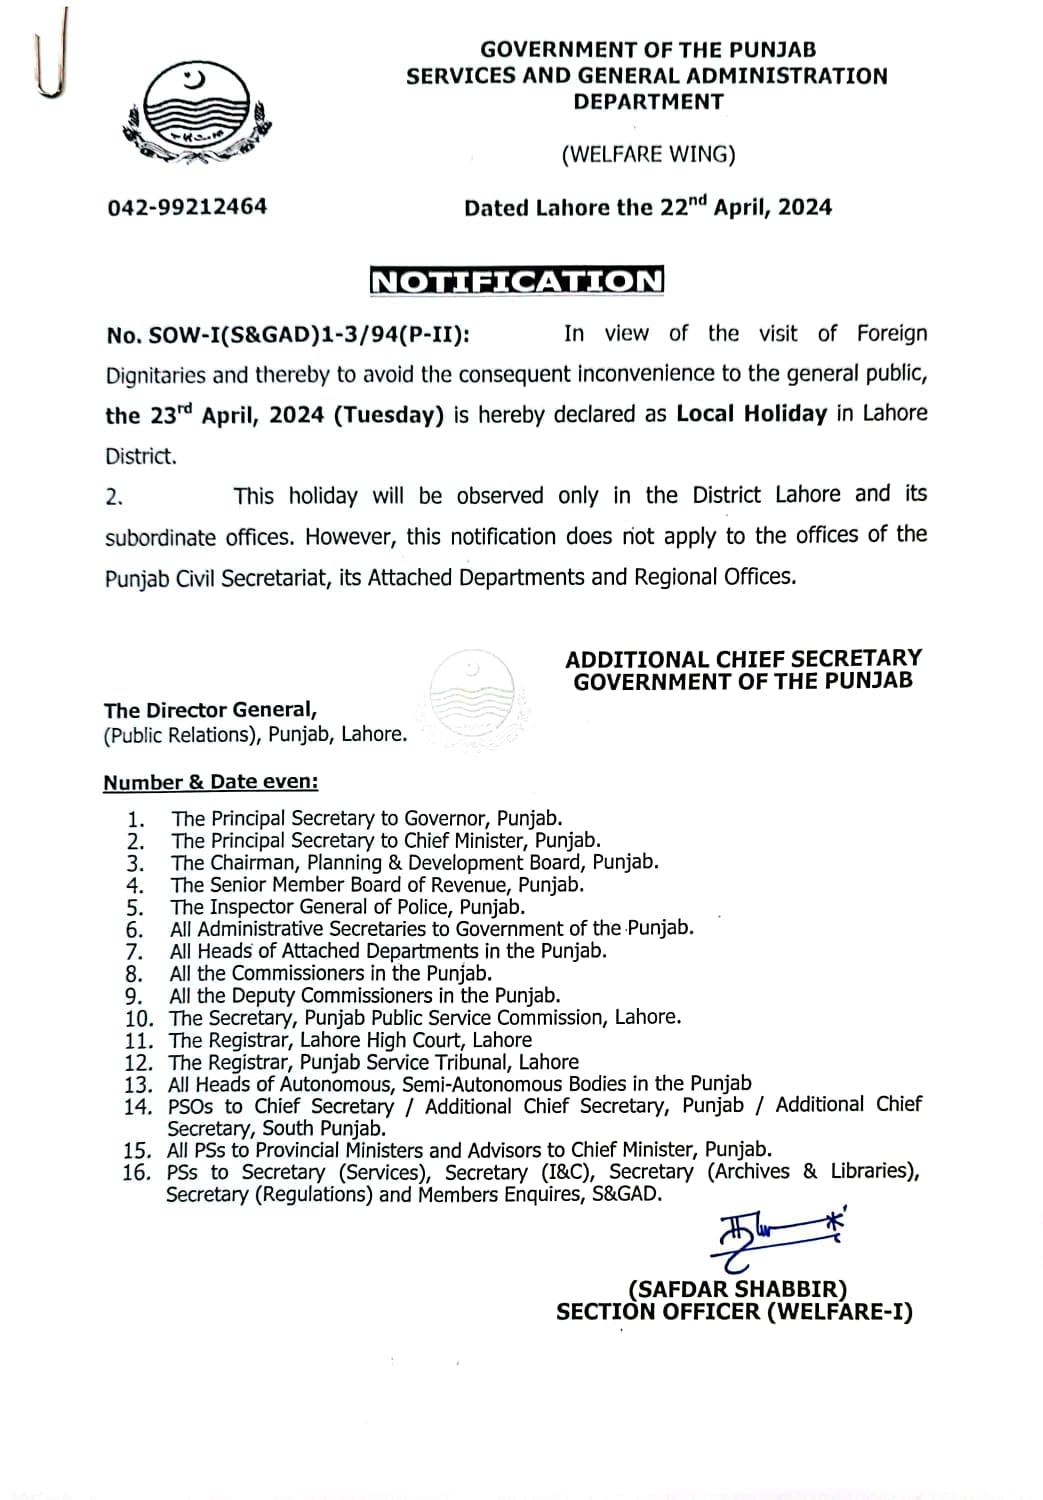 Notification of Local Holiday on 23 April 2024 (Tuesday) in Lahore